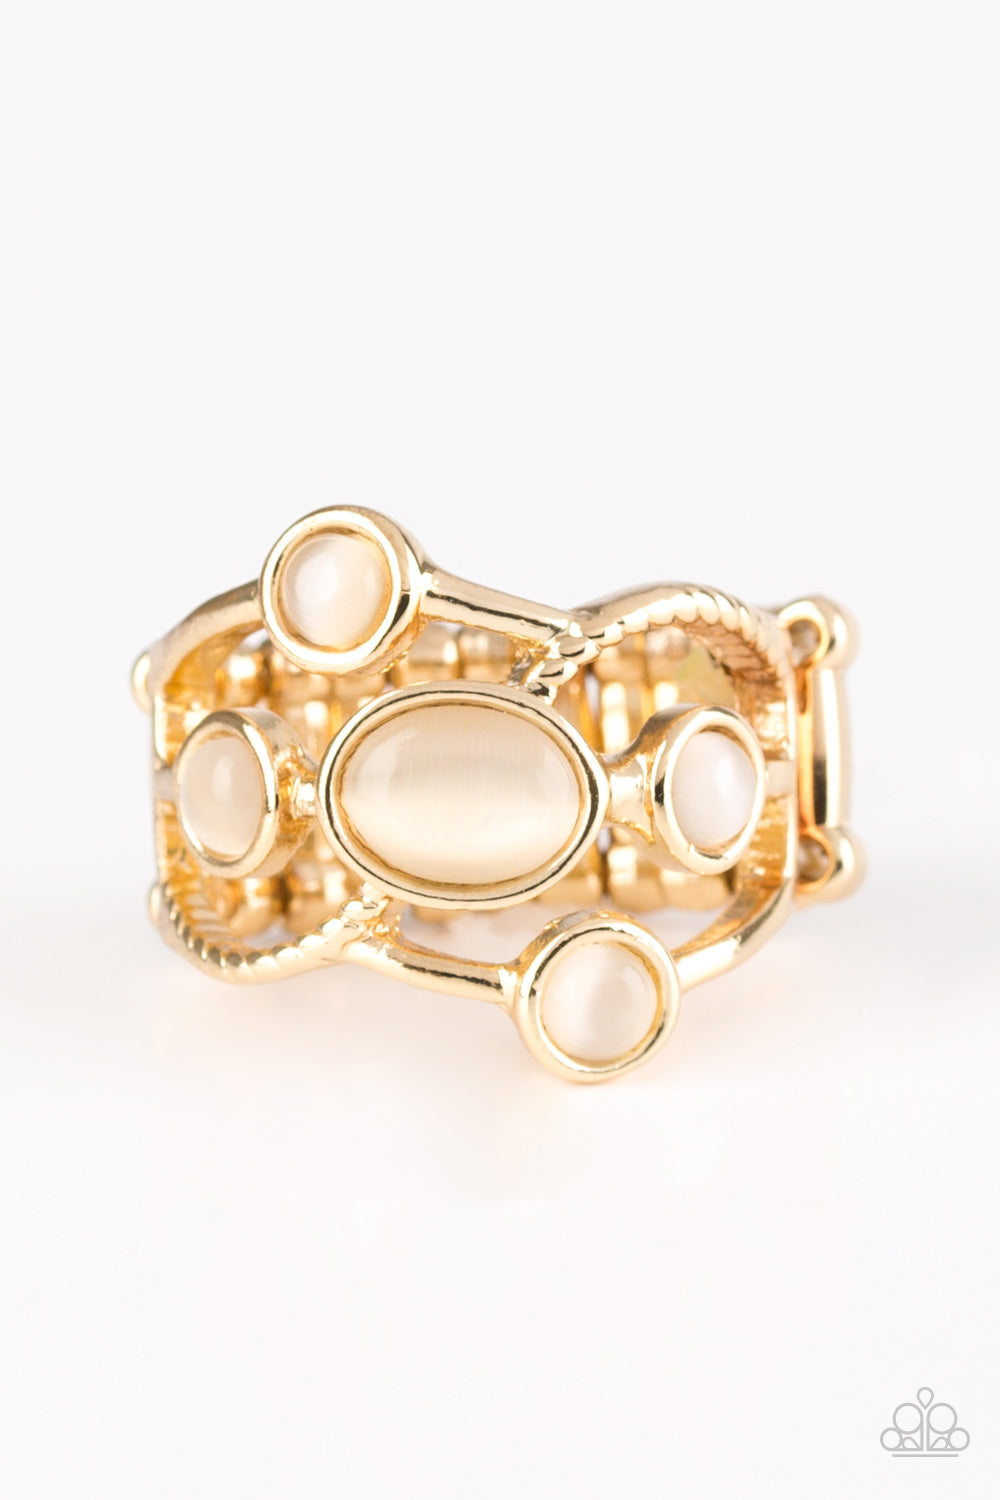 Moon Mood - Gold Moonstone Ring - Paparazzi Accessories - Featuring smooth and textured finishes, glistening gold bars swoop across the finger, coalescing into an airy band. Varying in shape, glowing moonstones dot the swaying bands for a refined finish. Features a stretchy band for flexible fit. Sold as one individual ring.